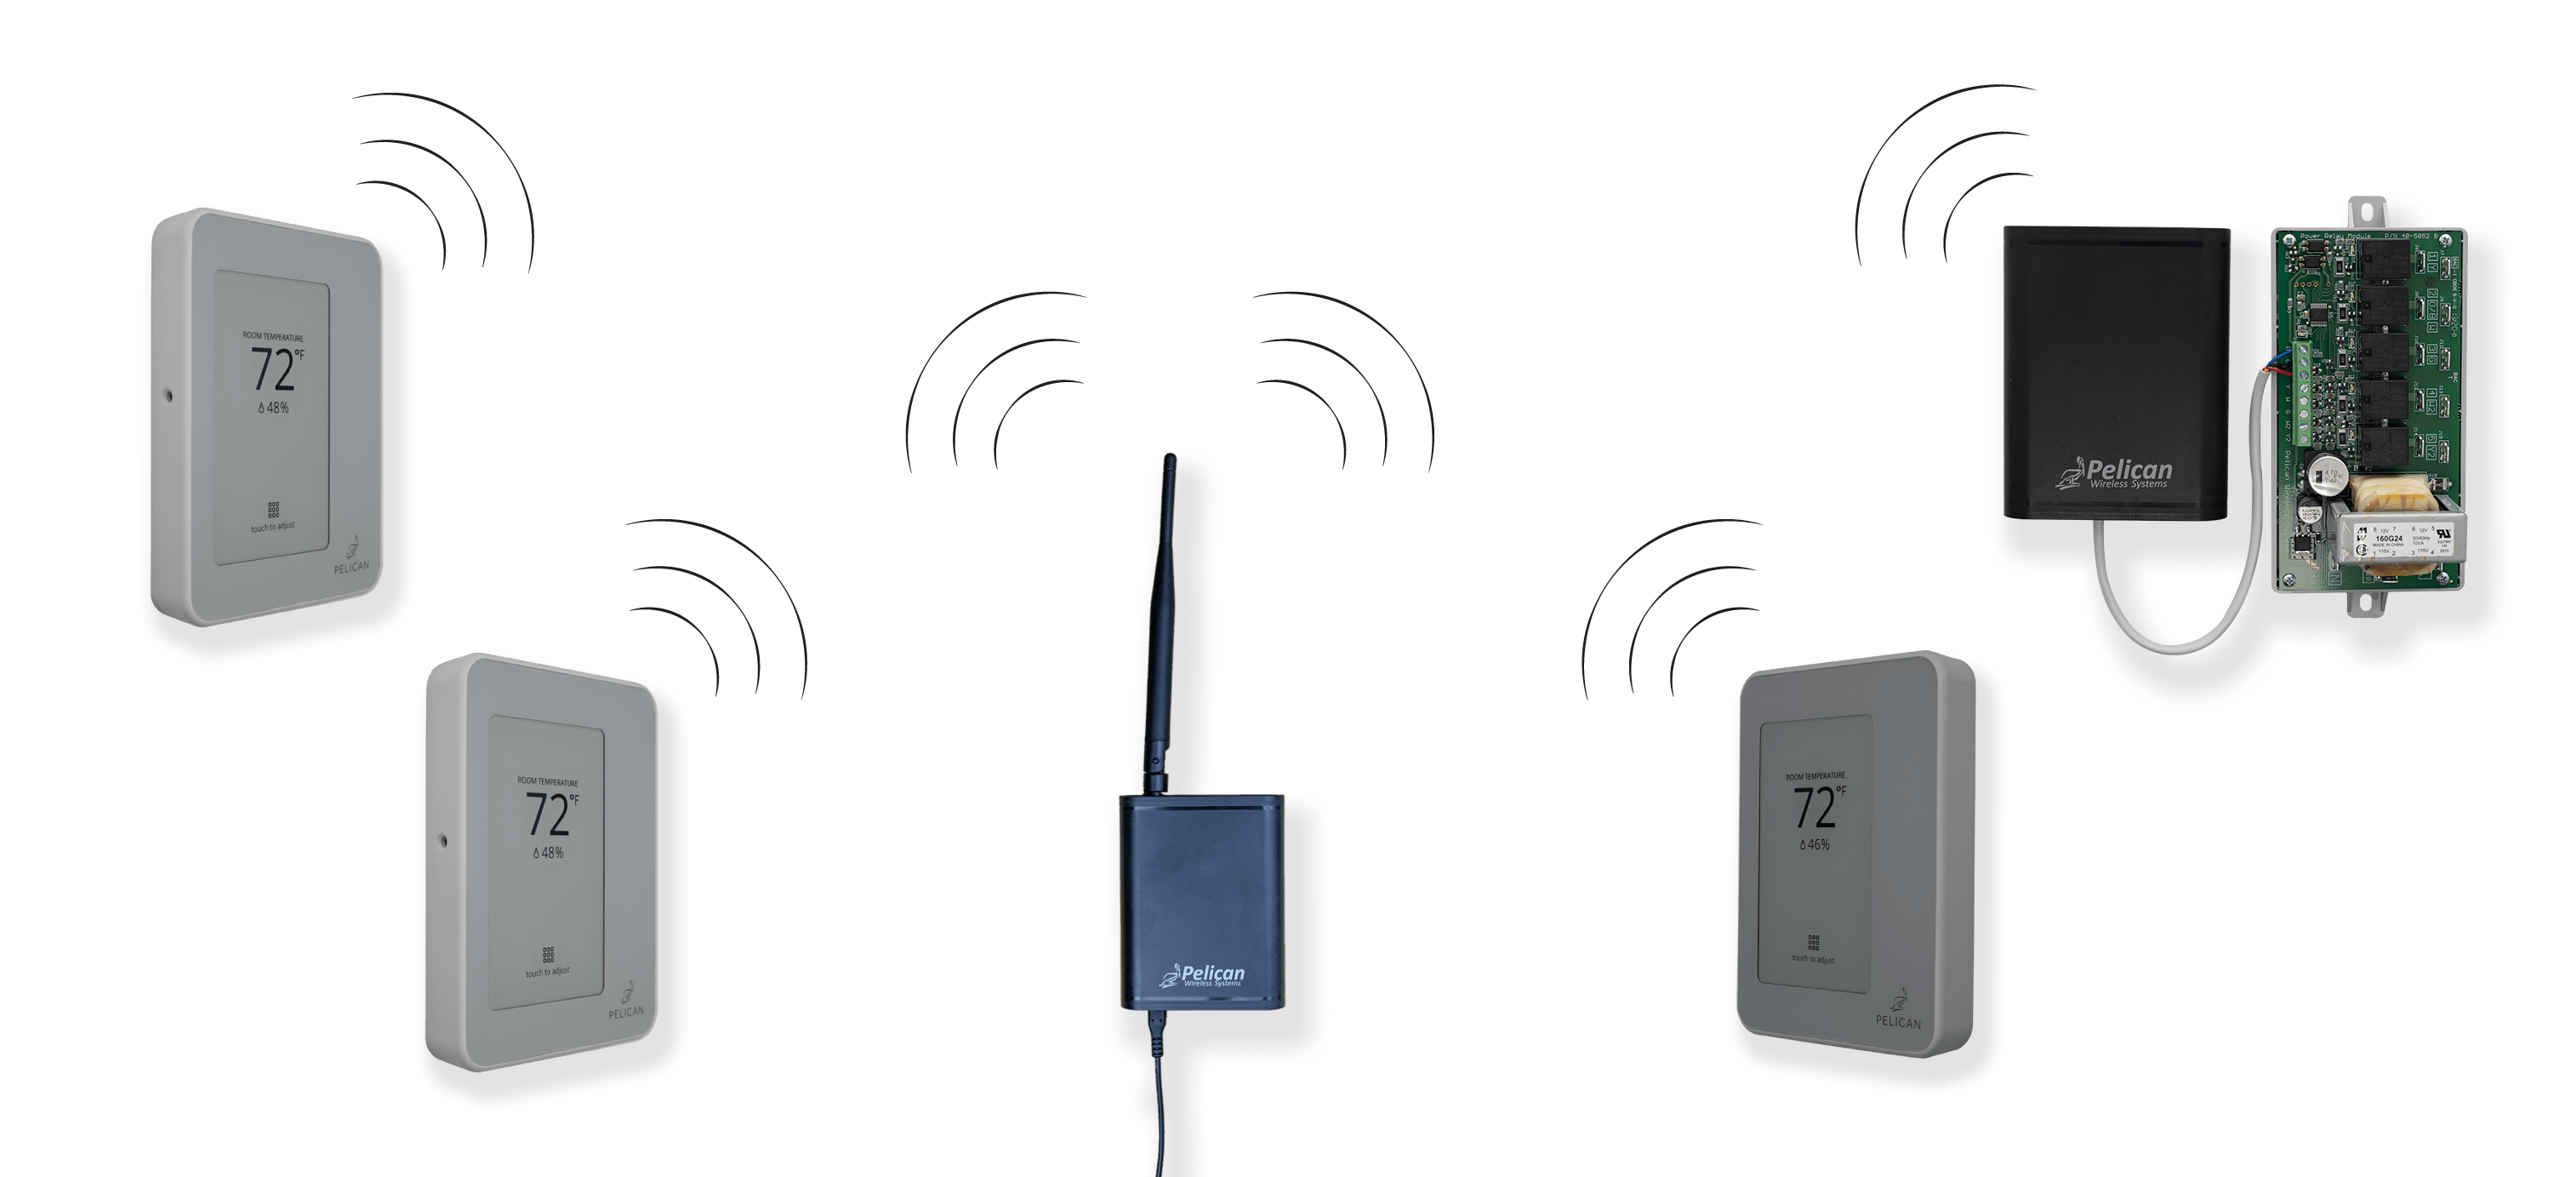 All Products - Pelican Wireless Systems